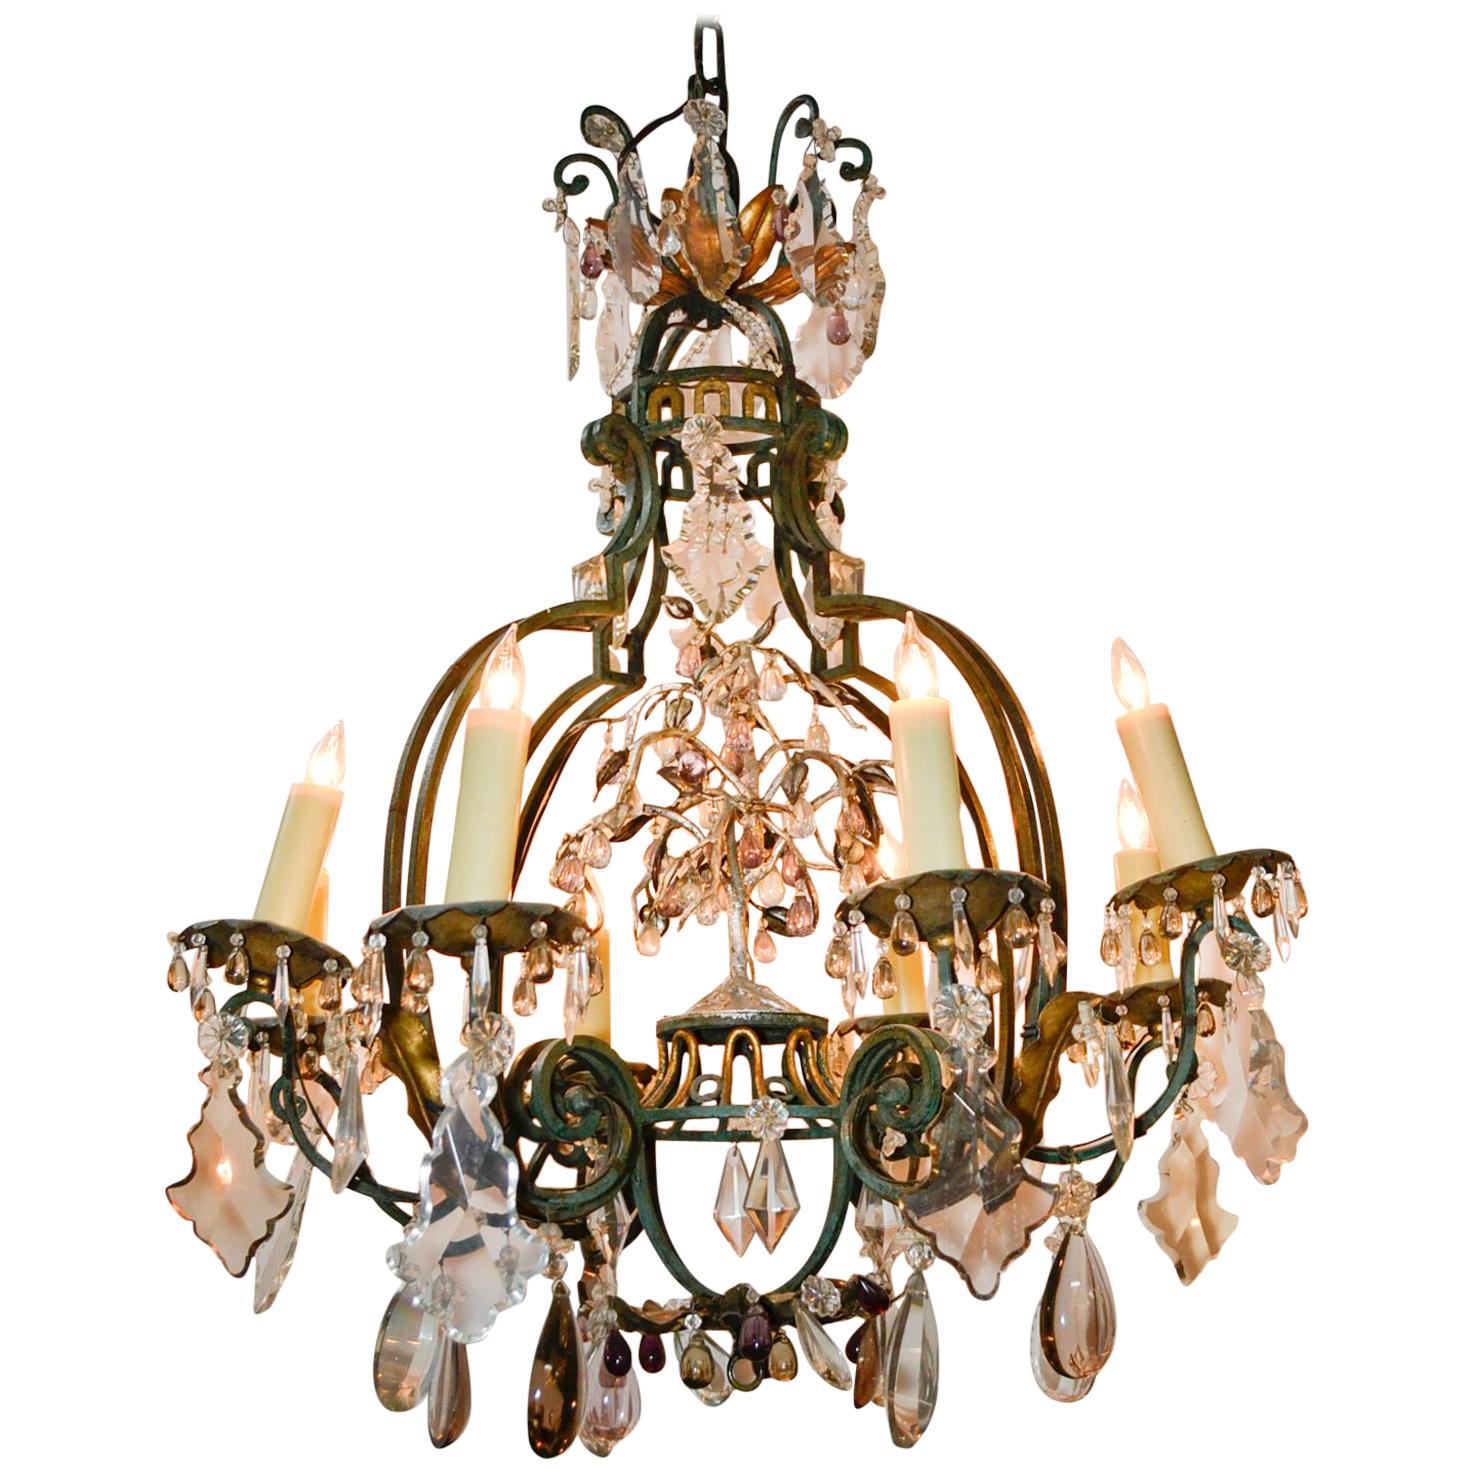 19th Century French Iron and Crystal Chandelier